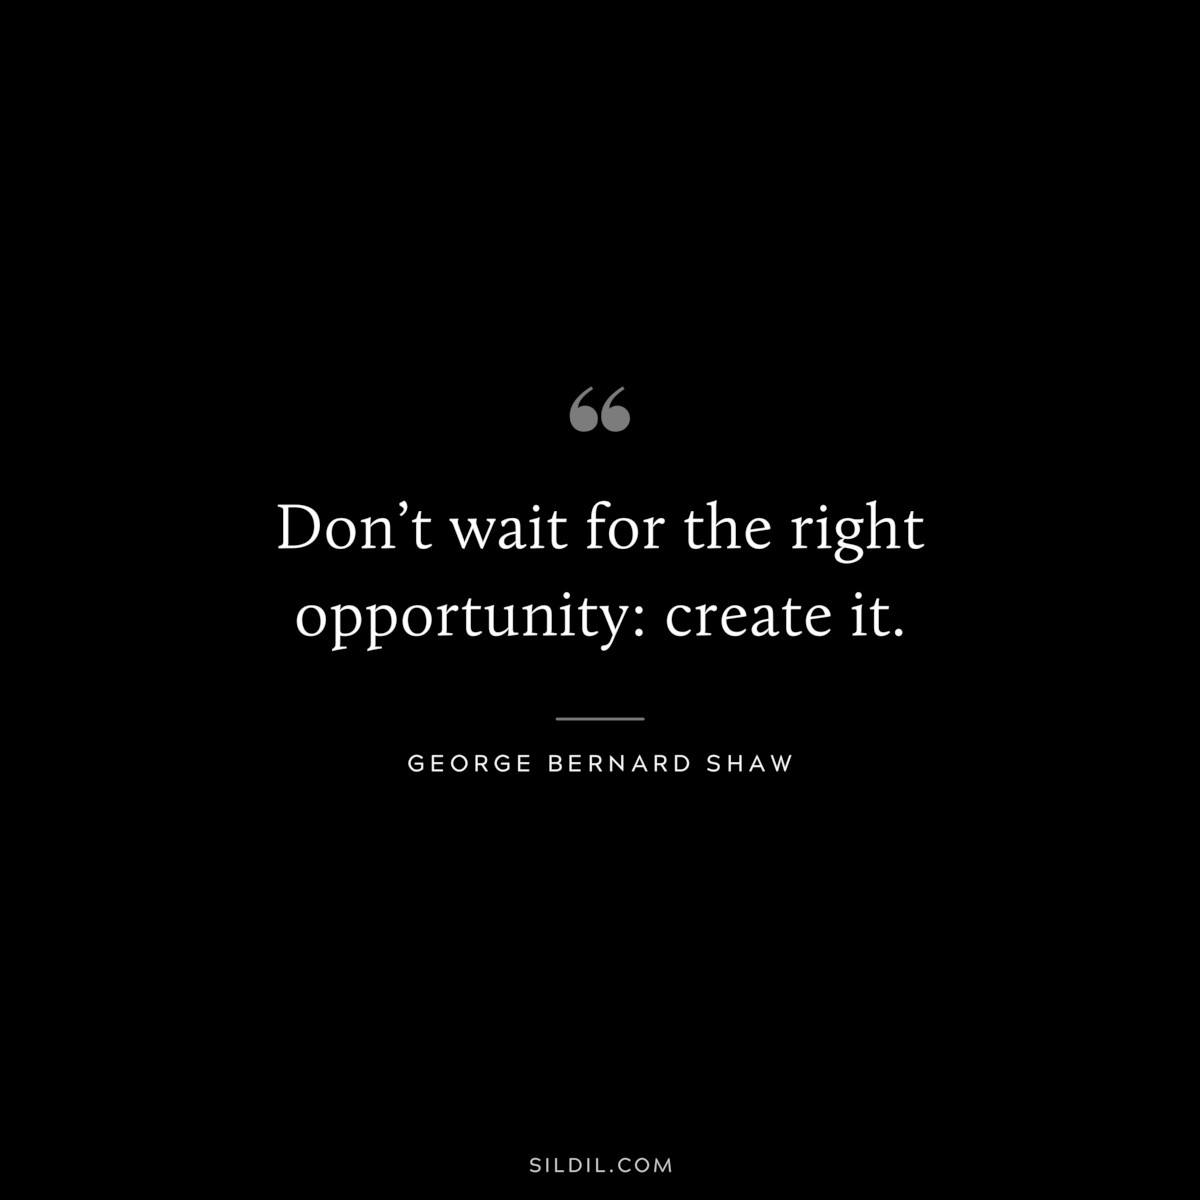 Don’t wait for the right opportunity: create it. ― George Bernard Shaw